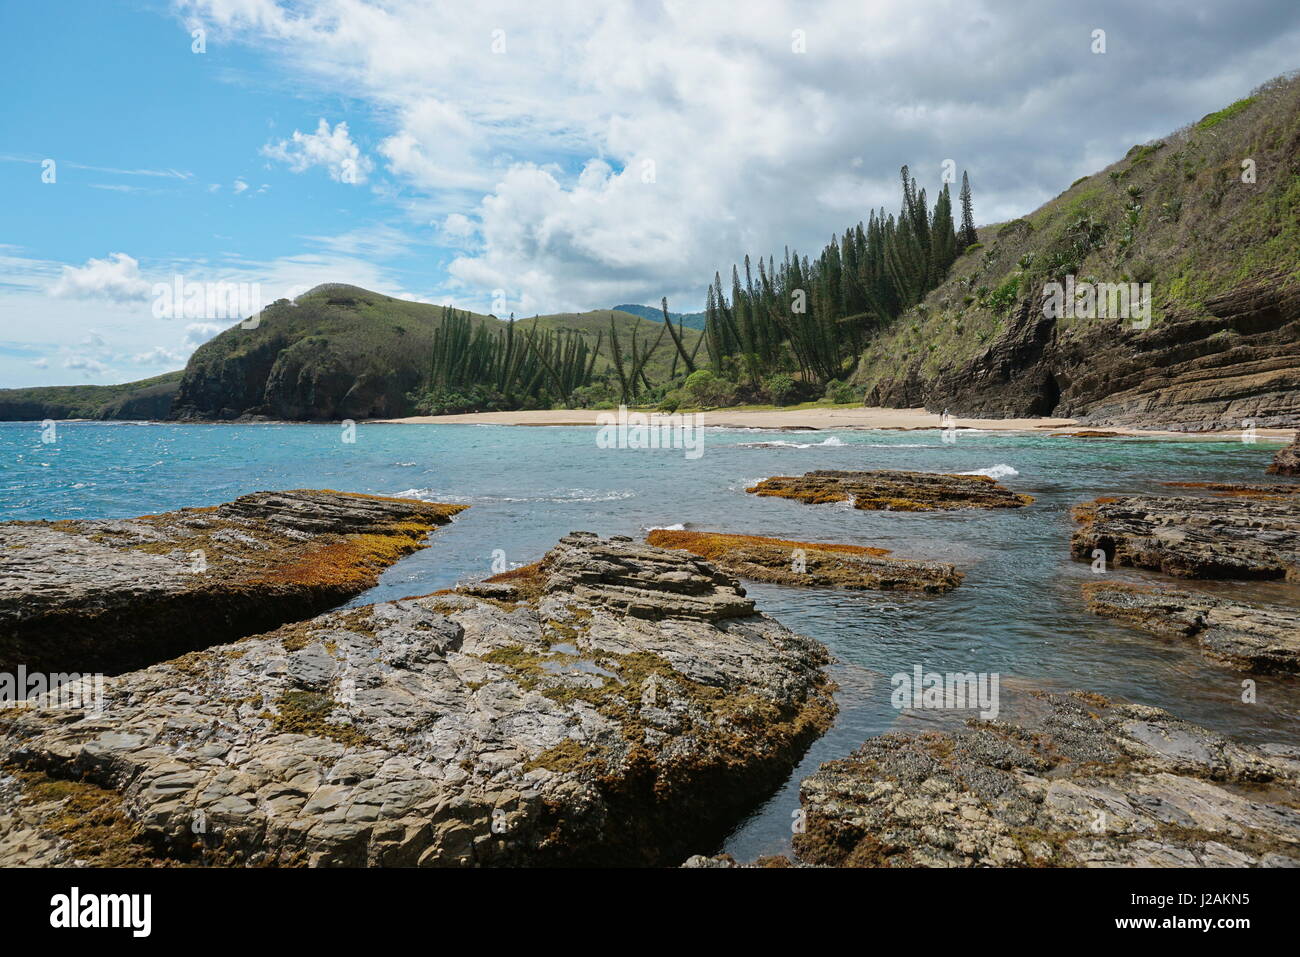 Coastline of New Caledonia landscape, beach and rocks with Araucaria pines, Turtle bay, Bourail, Grande Terre island, south Pacific Stock Photo